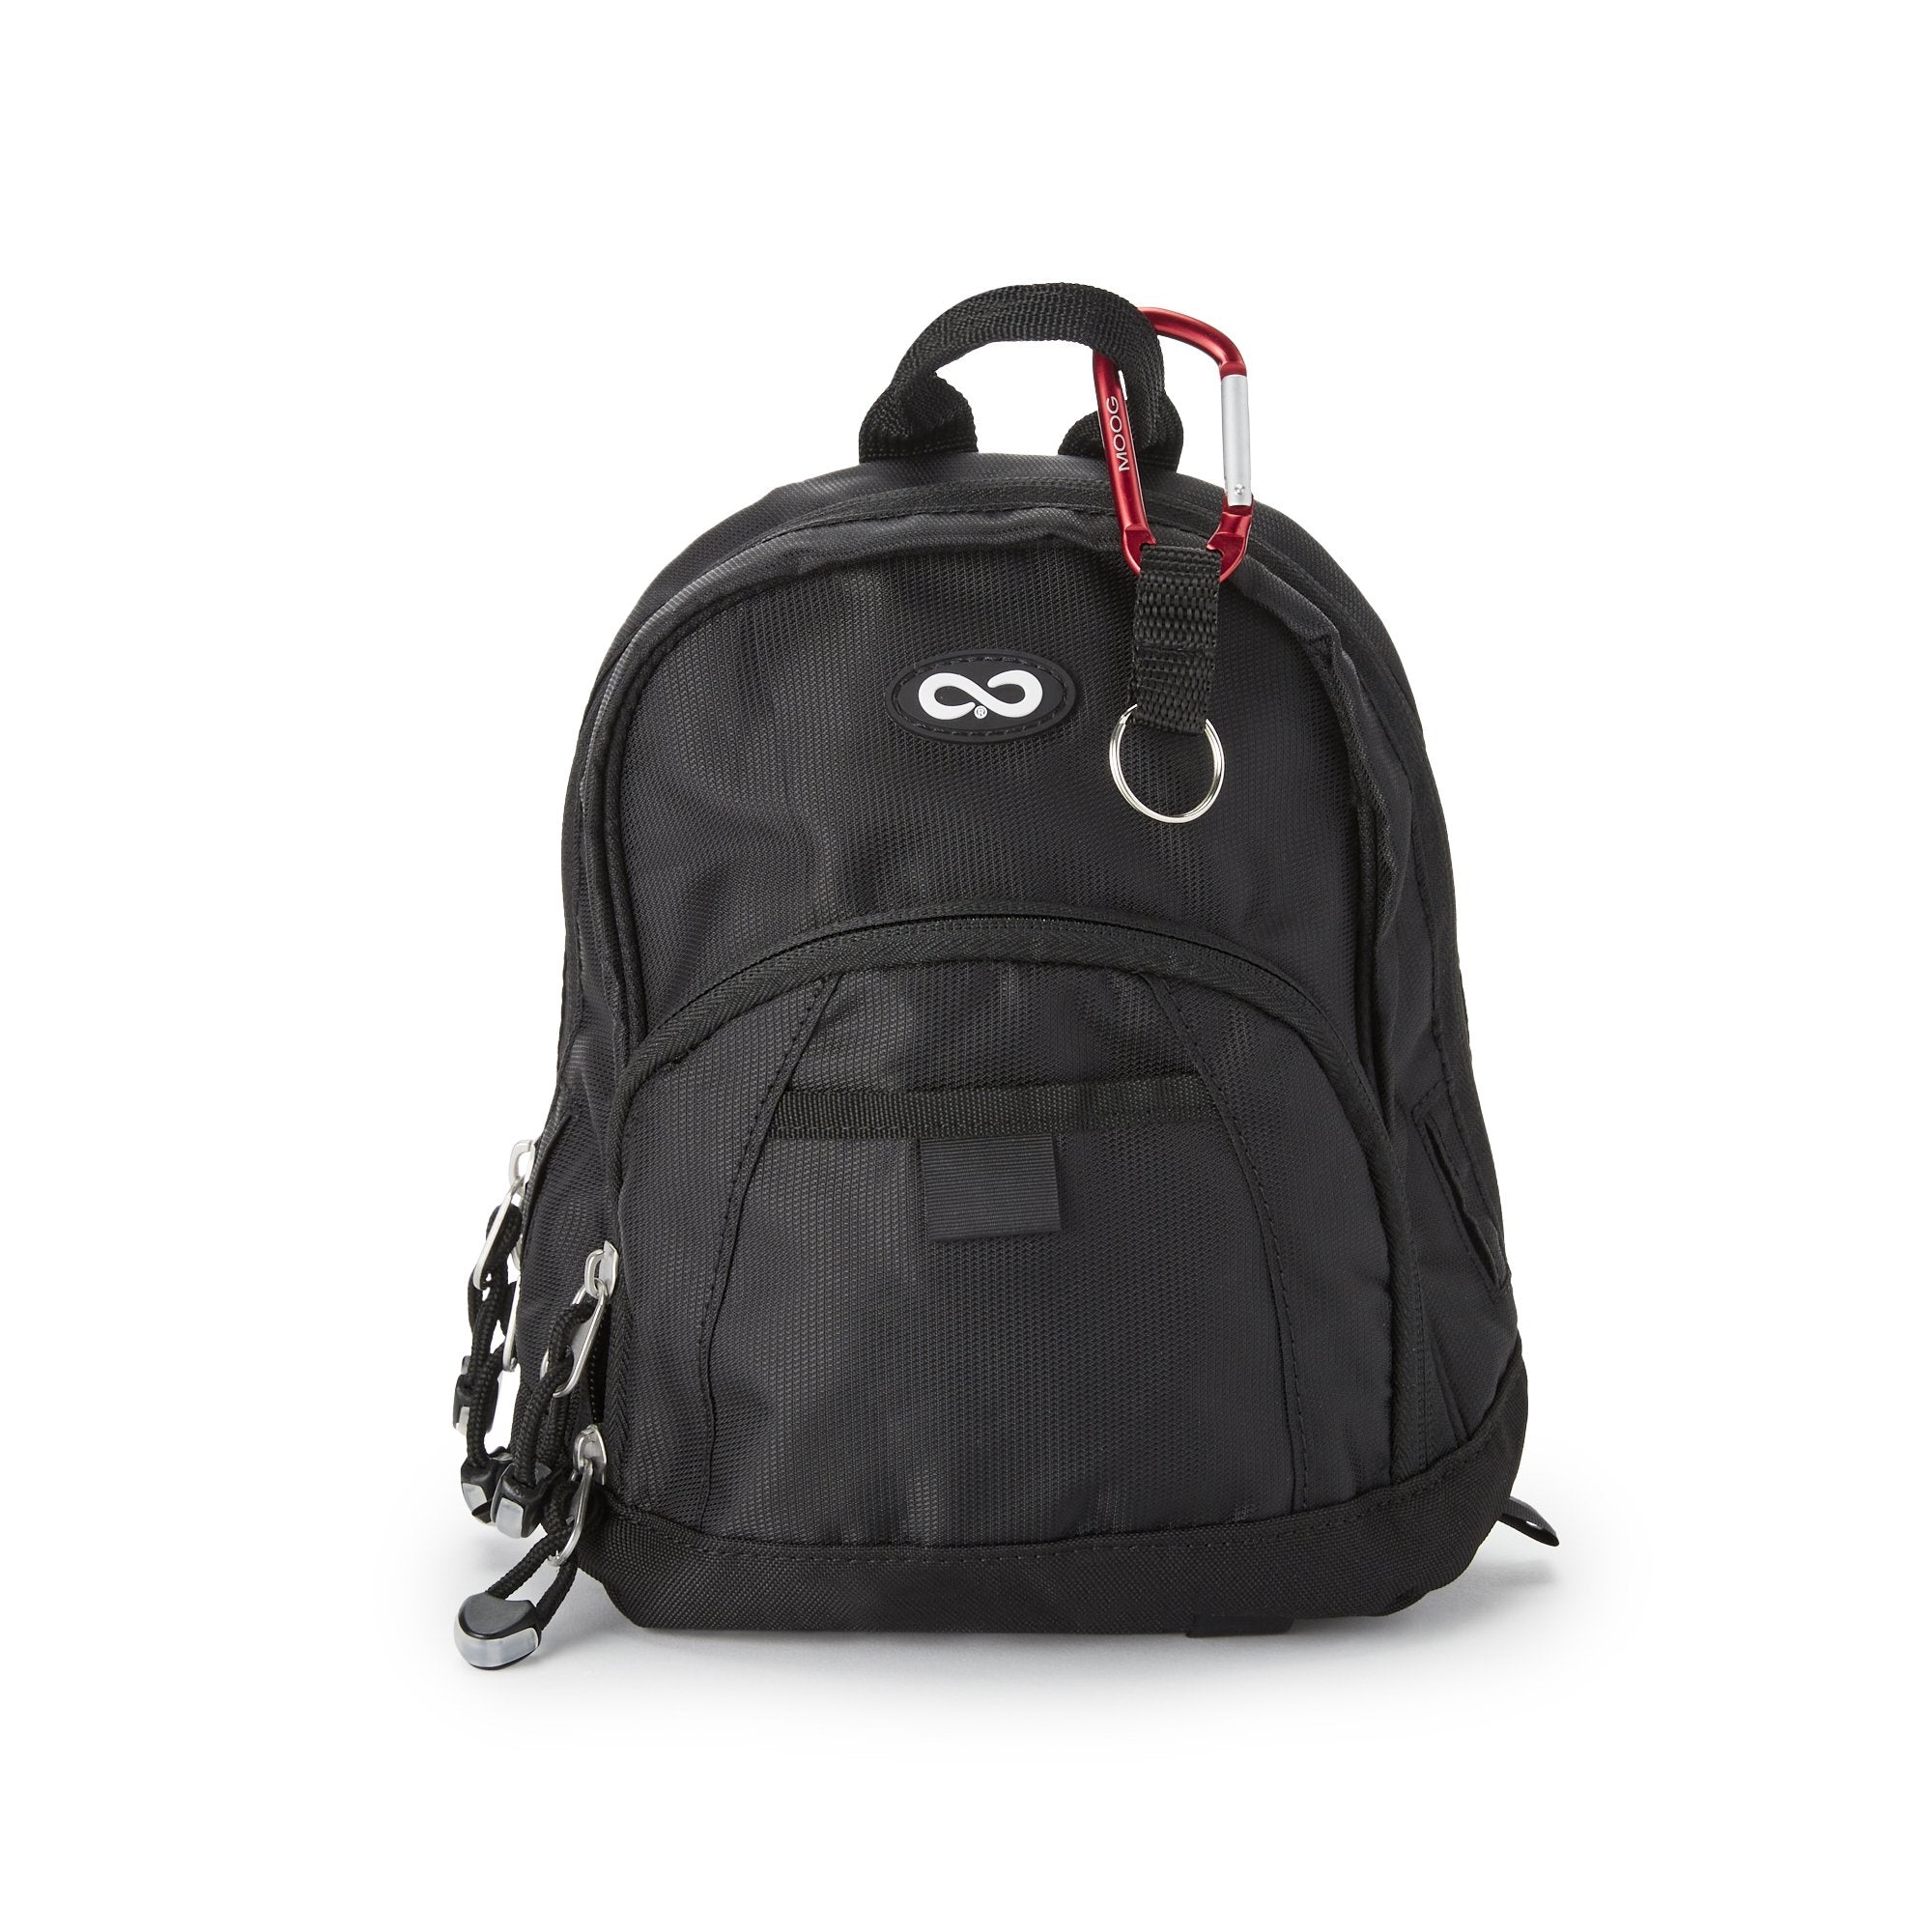 Zevex Pump Backpack, For Enteralite Infinity Or Enteralite Enteral Feeding Pumps -Each